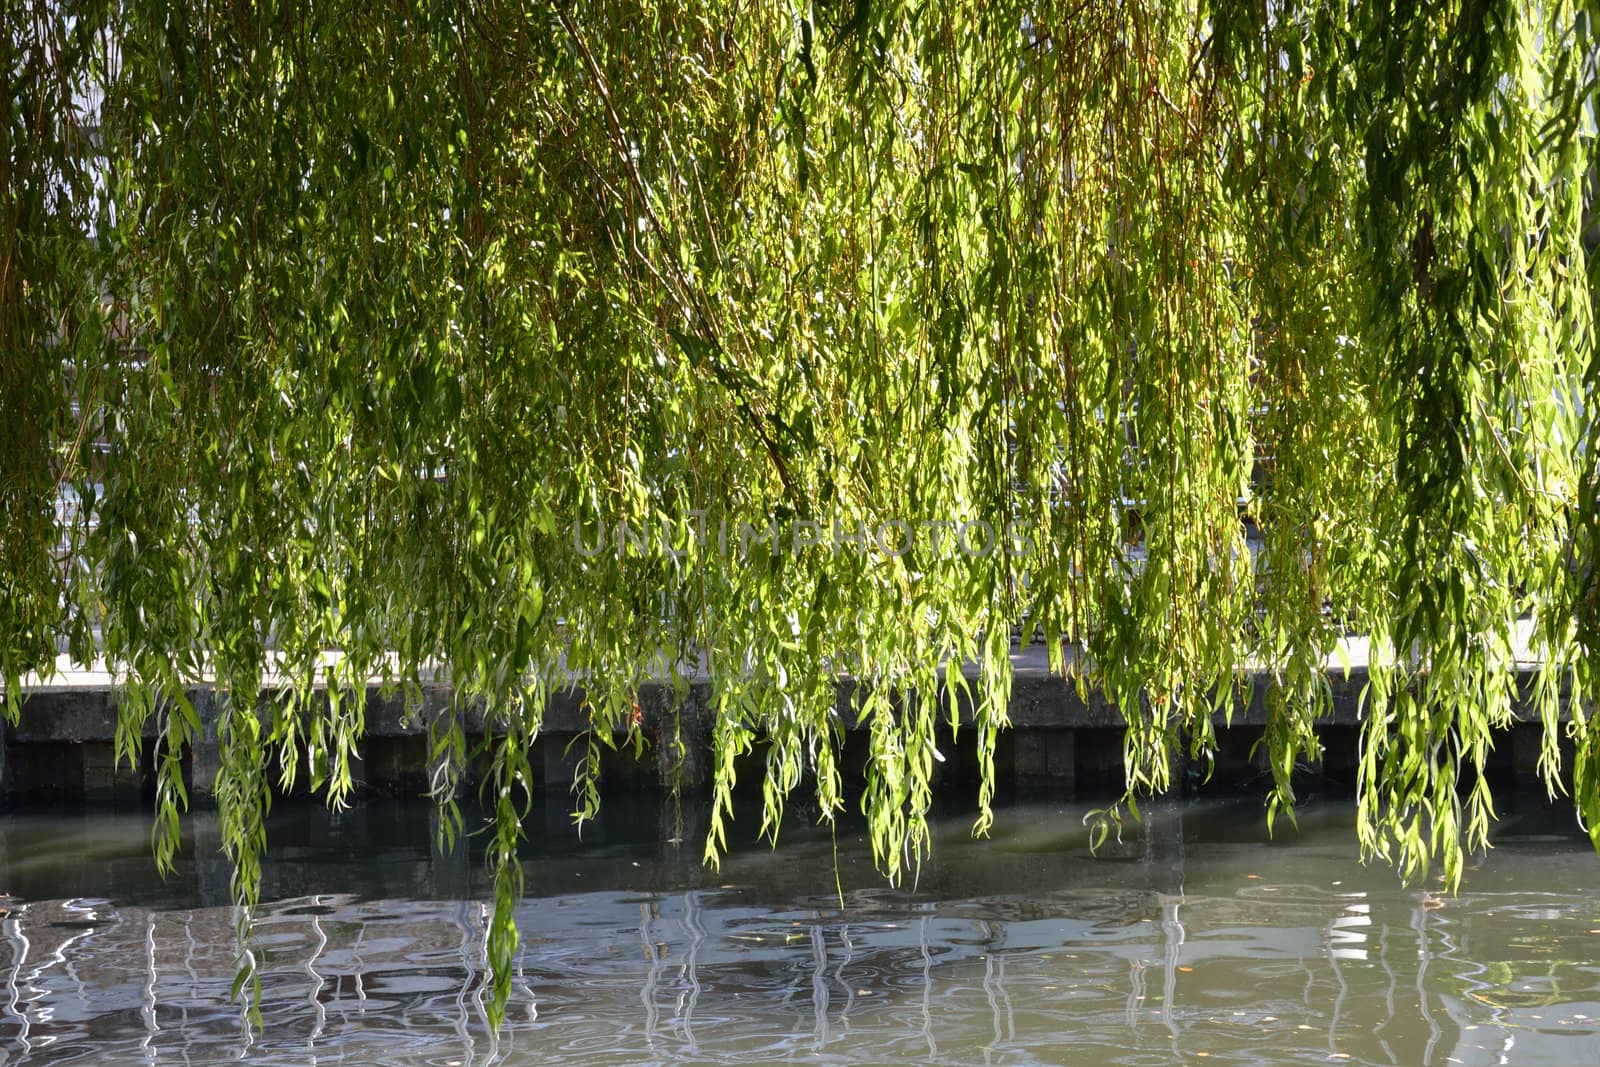 willow over canal by pauws99